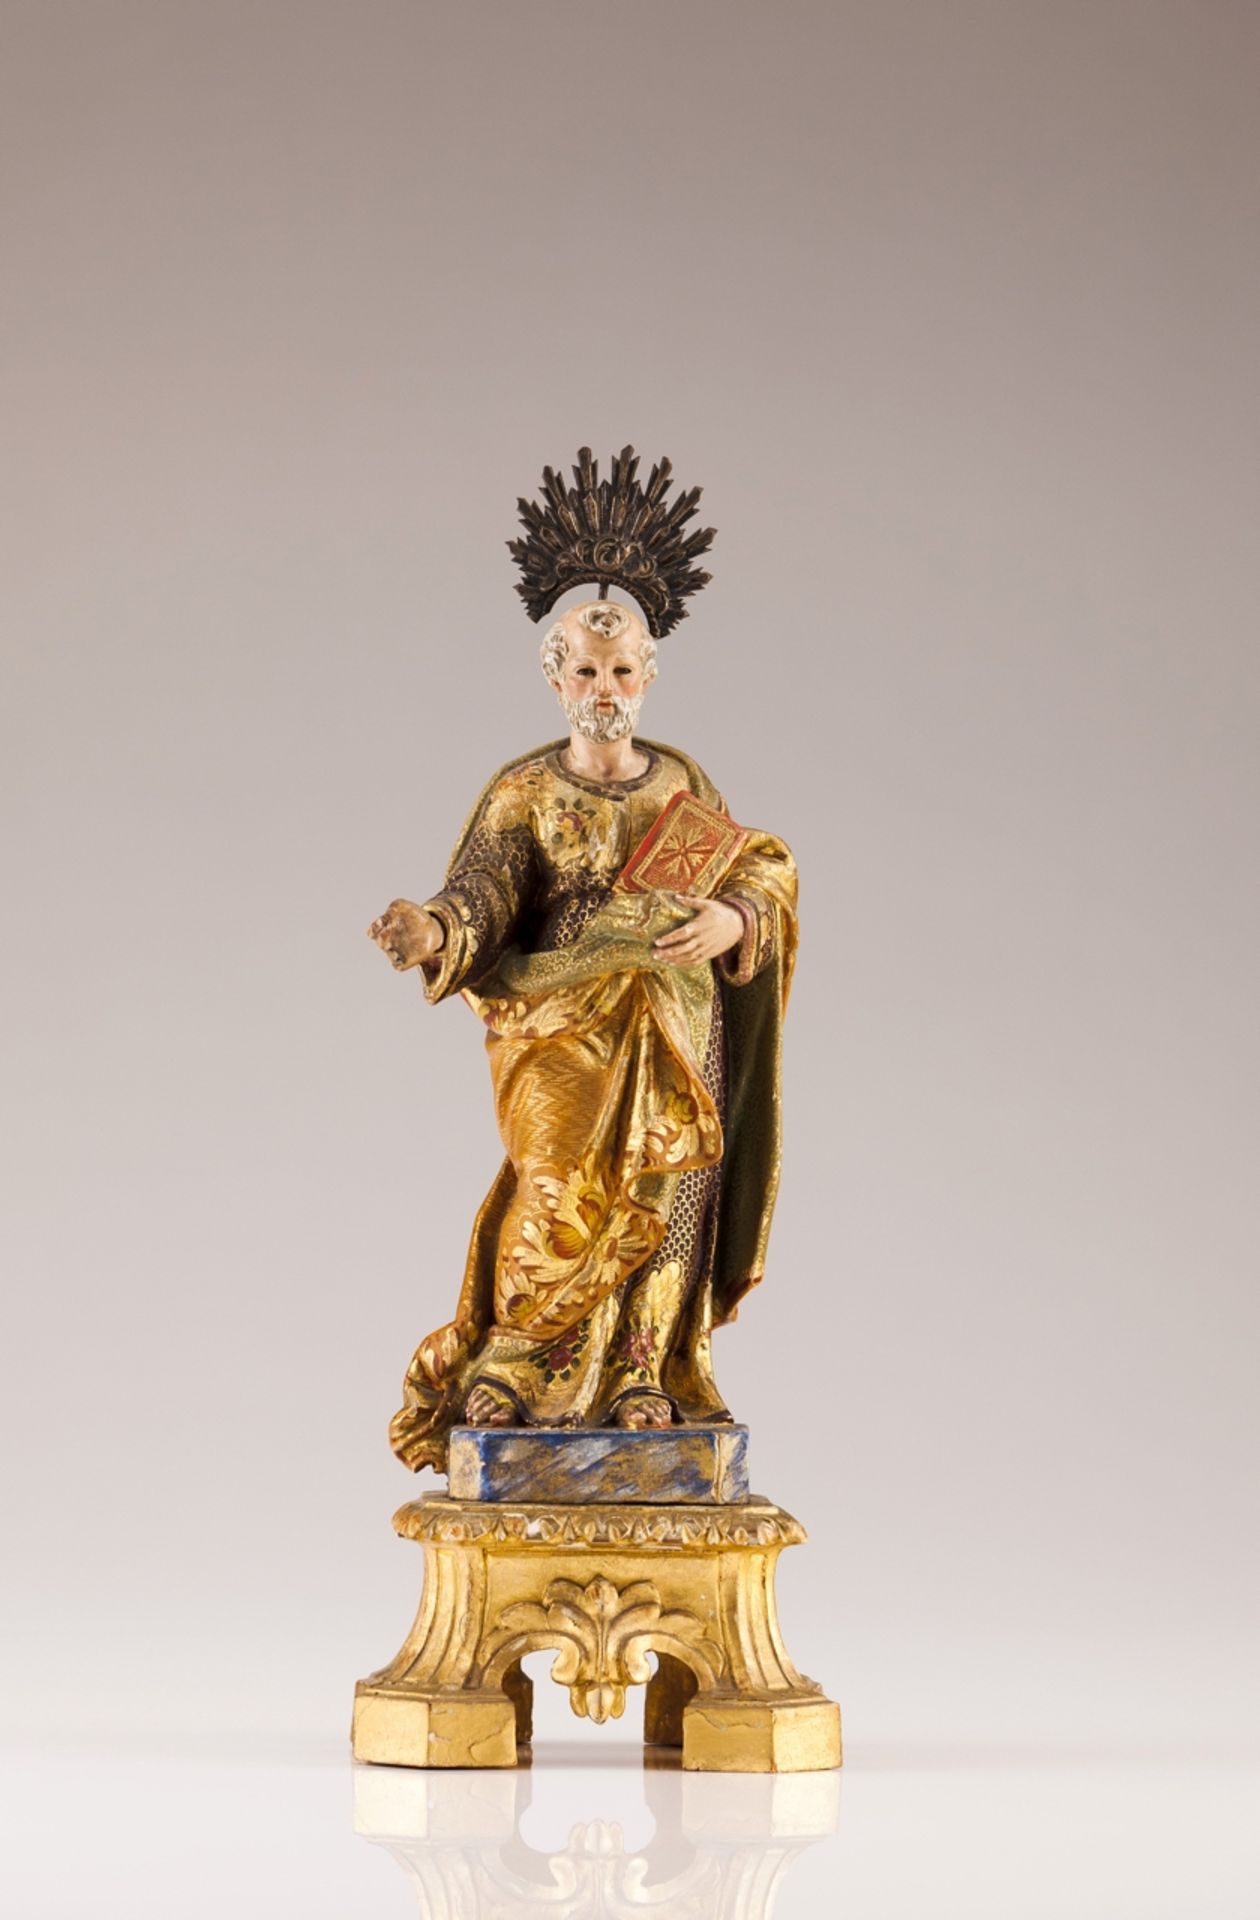 A 18th century Portuguese sculpture of Evangelist  Carved, gilt and polychrome wood   Gilt base